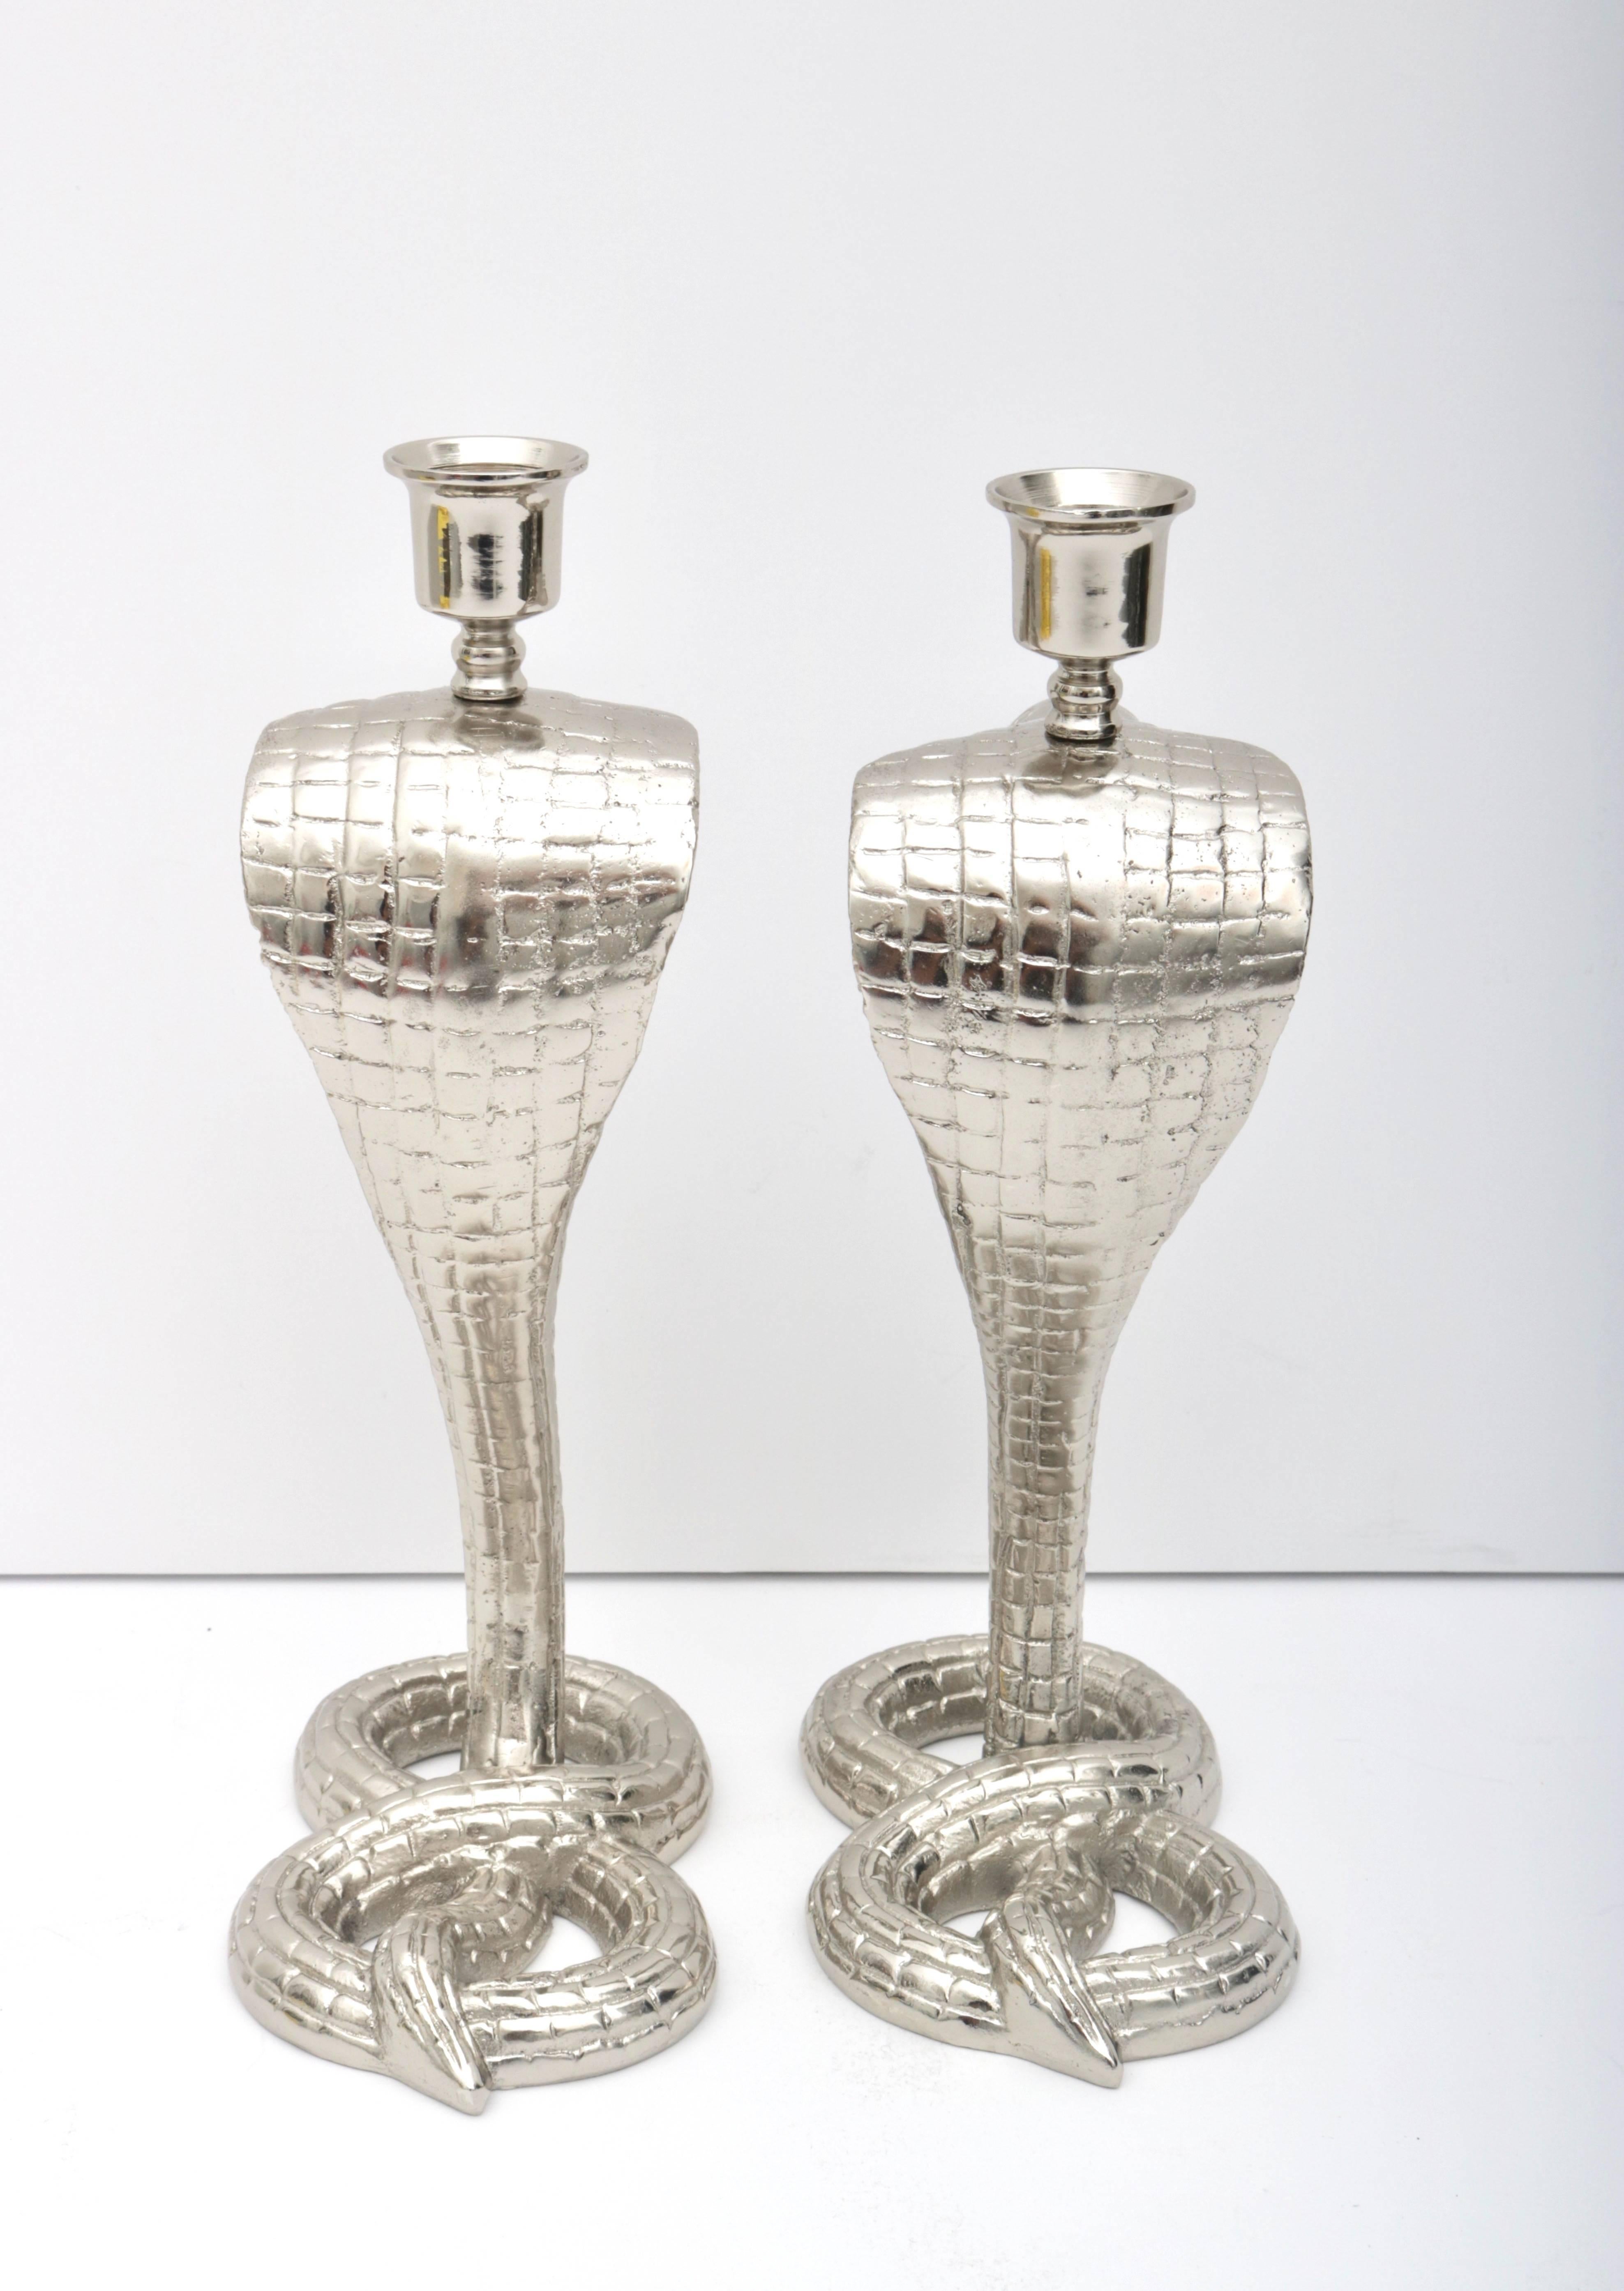 Pair of Egyptian Revival Nickle-Plated Cobra-Form Candleholders For Sale 2